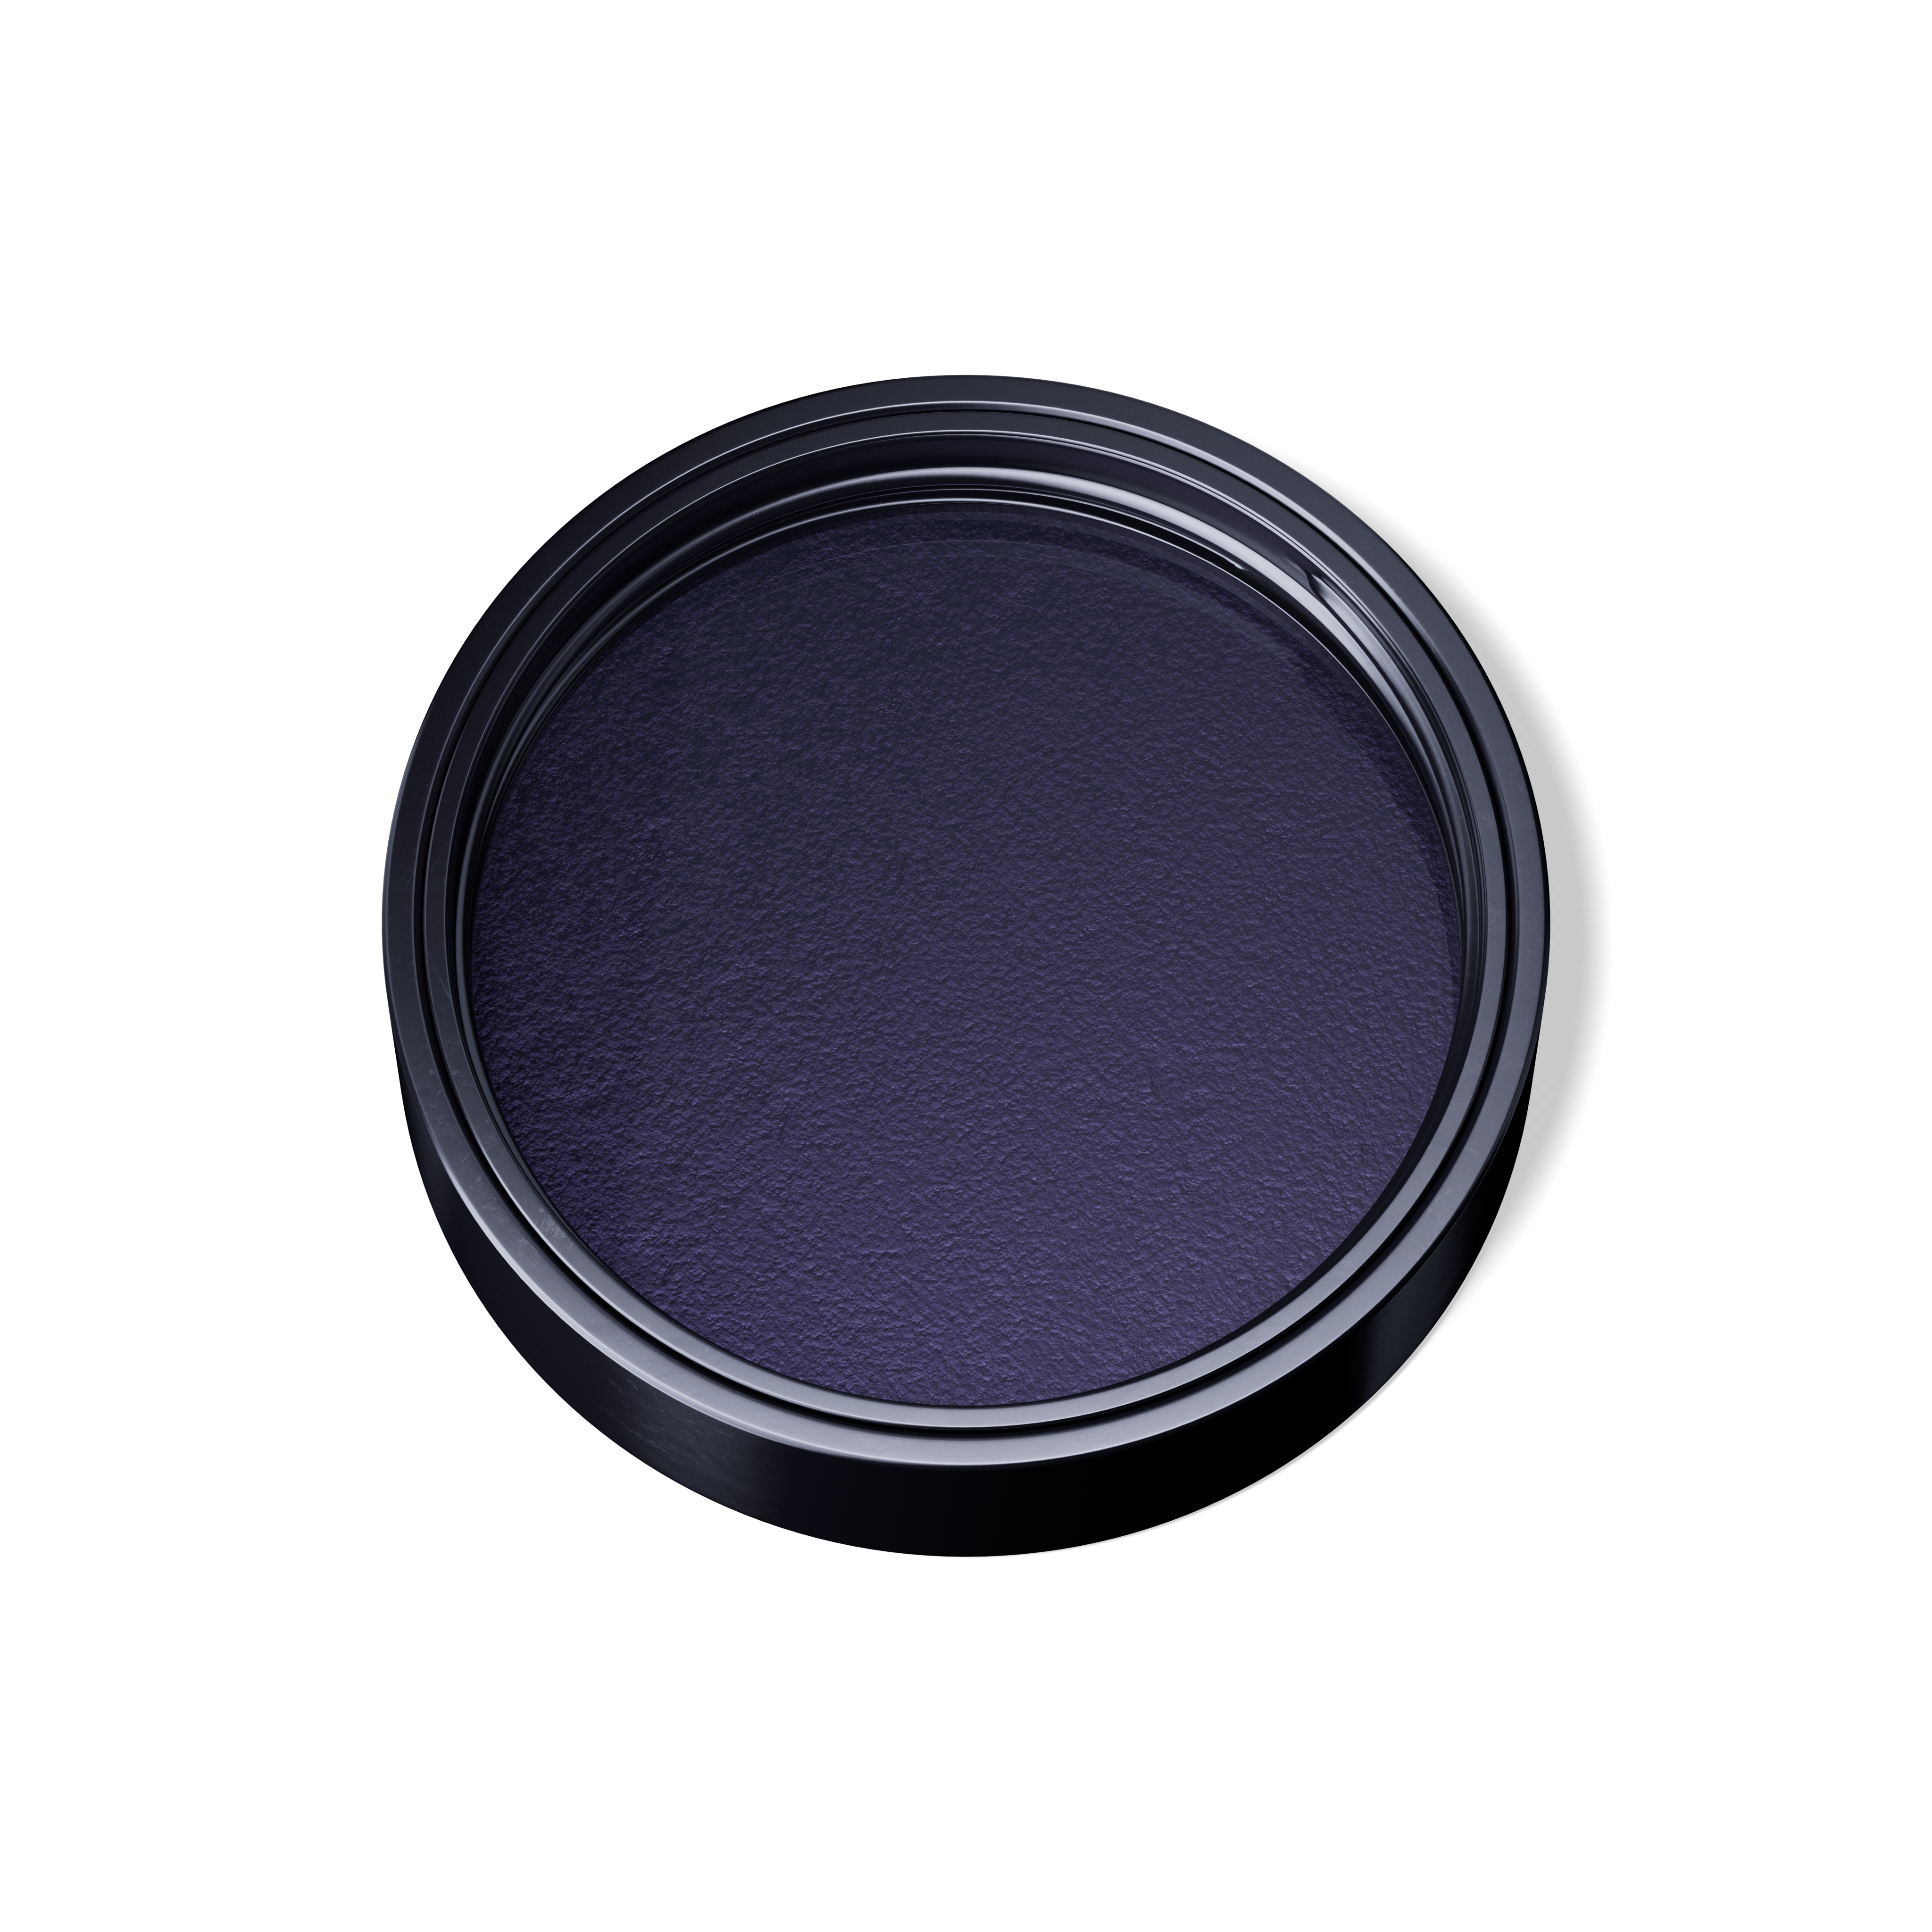 Lid child-resistant Modern 64 special, PP, black, glossy finish, violet Phan inlay (Eris 120)